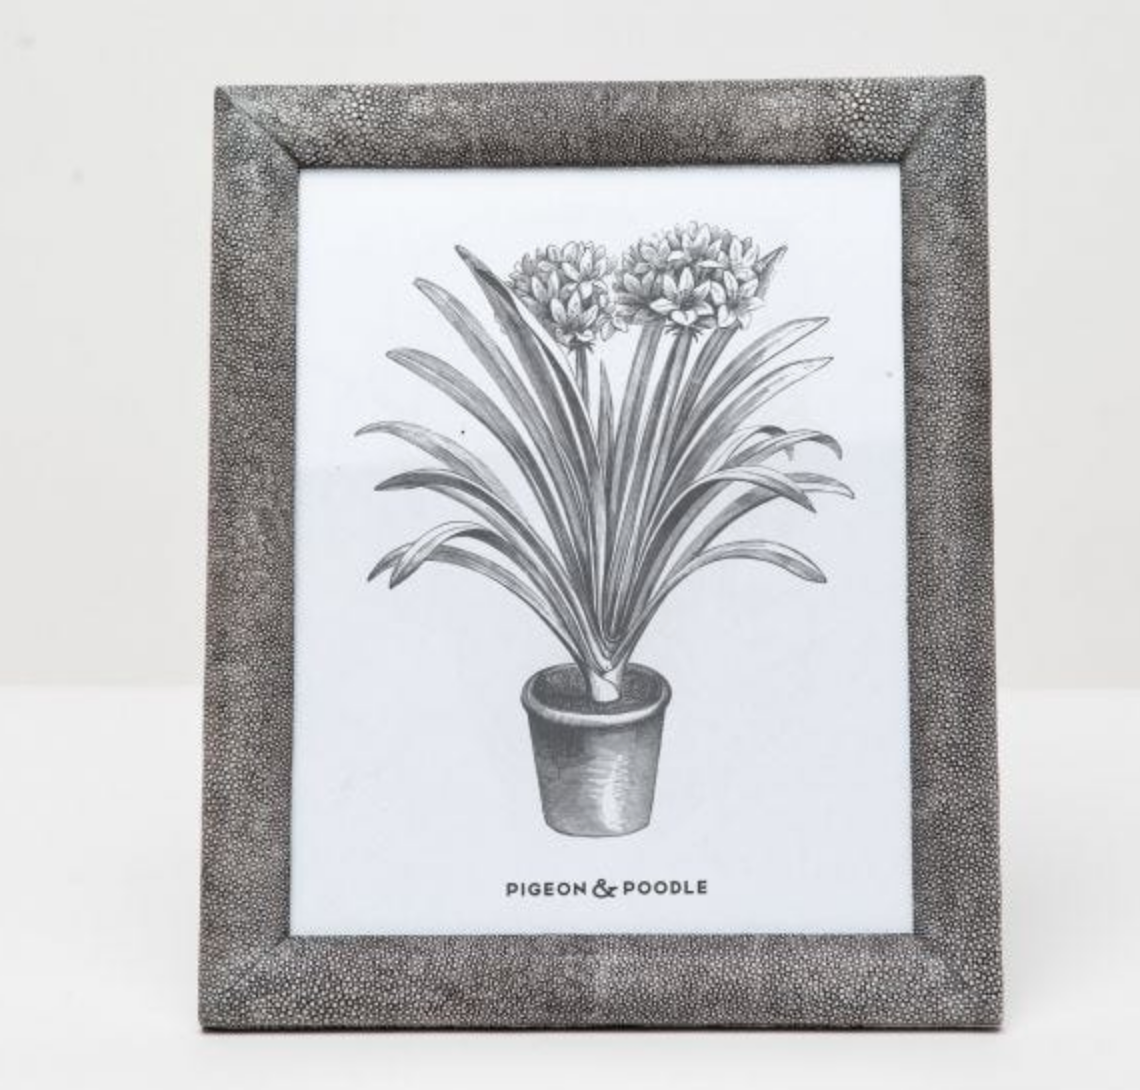 Oxford Faux Shagreen Frame Cool Gray